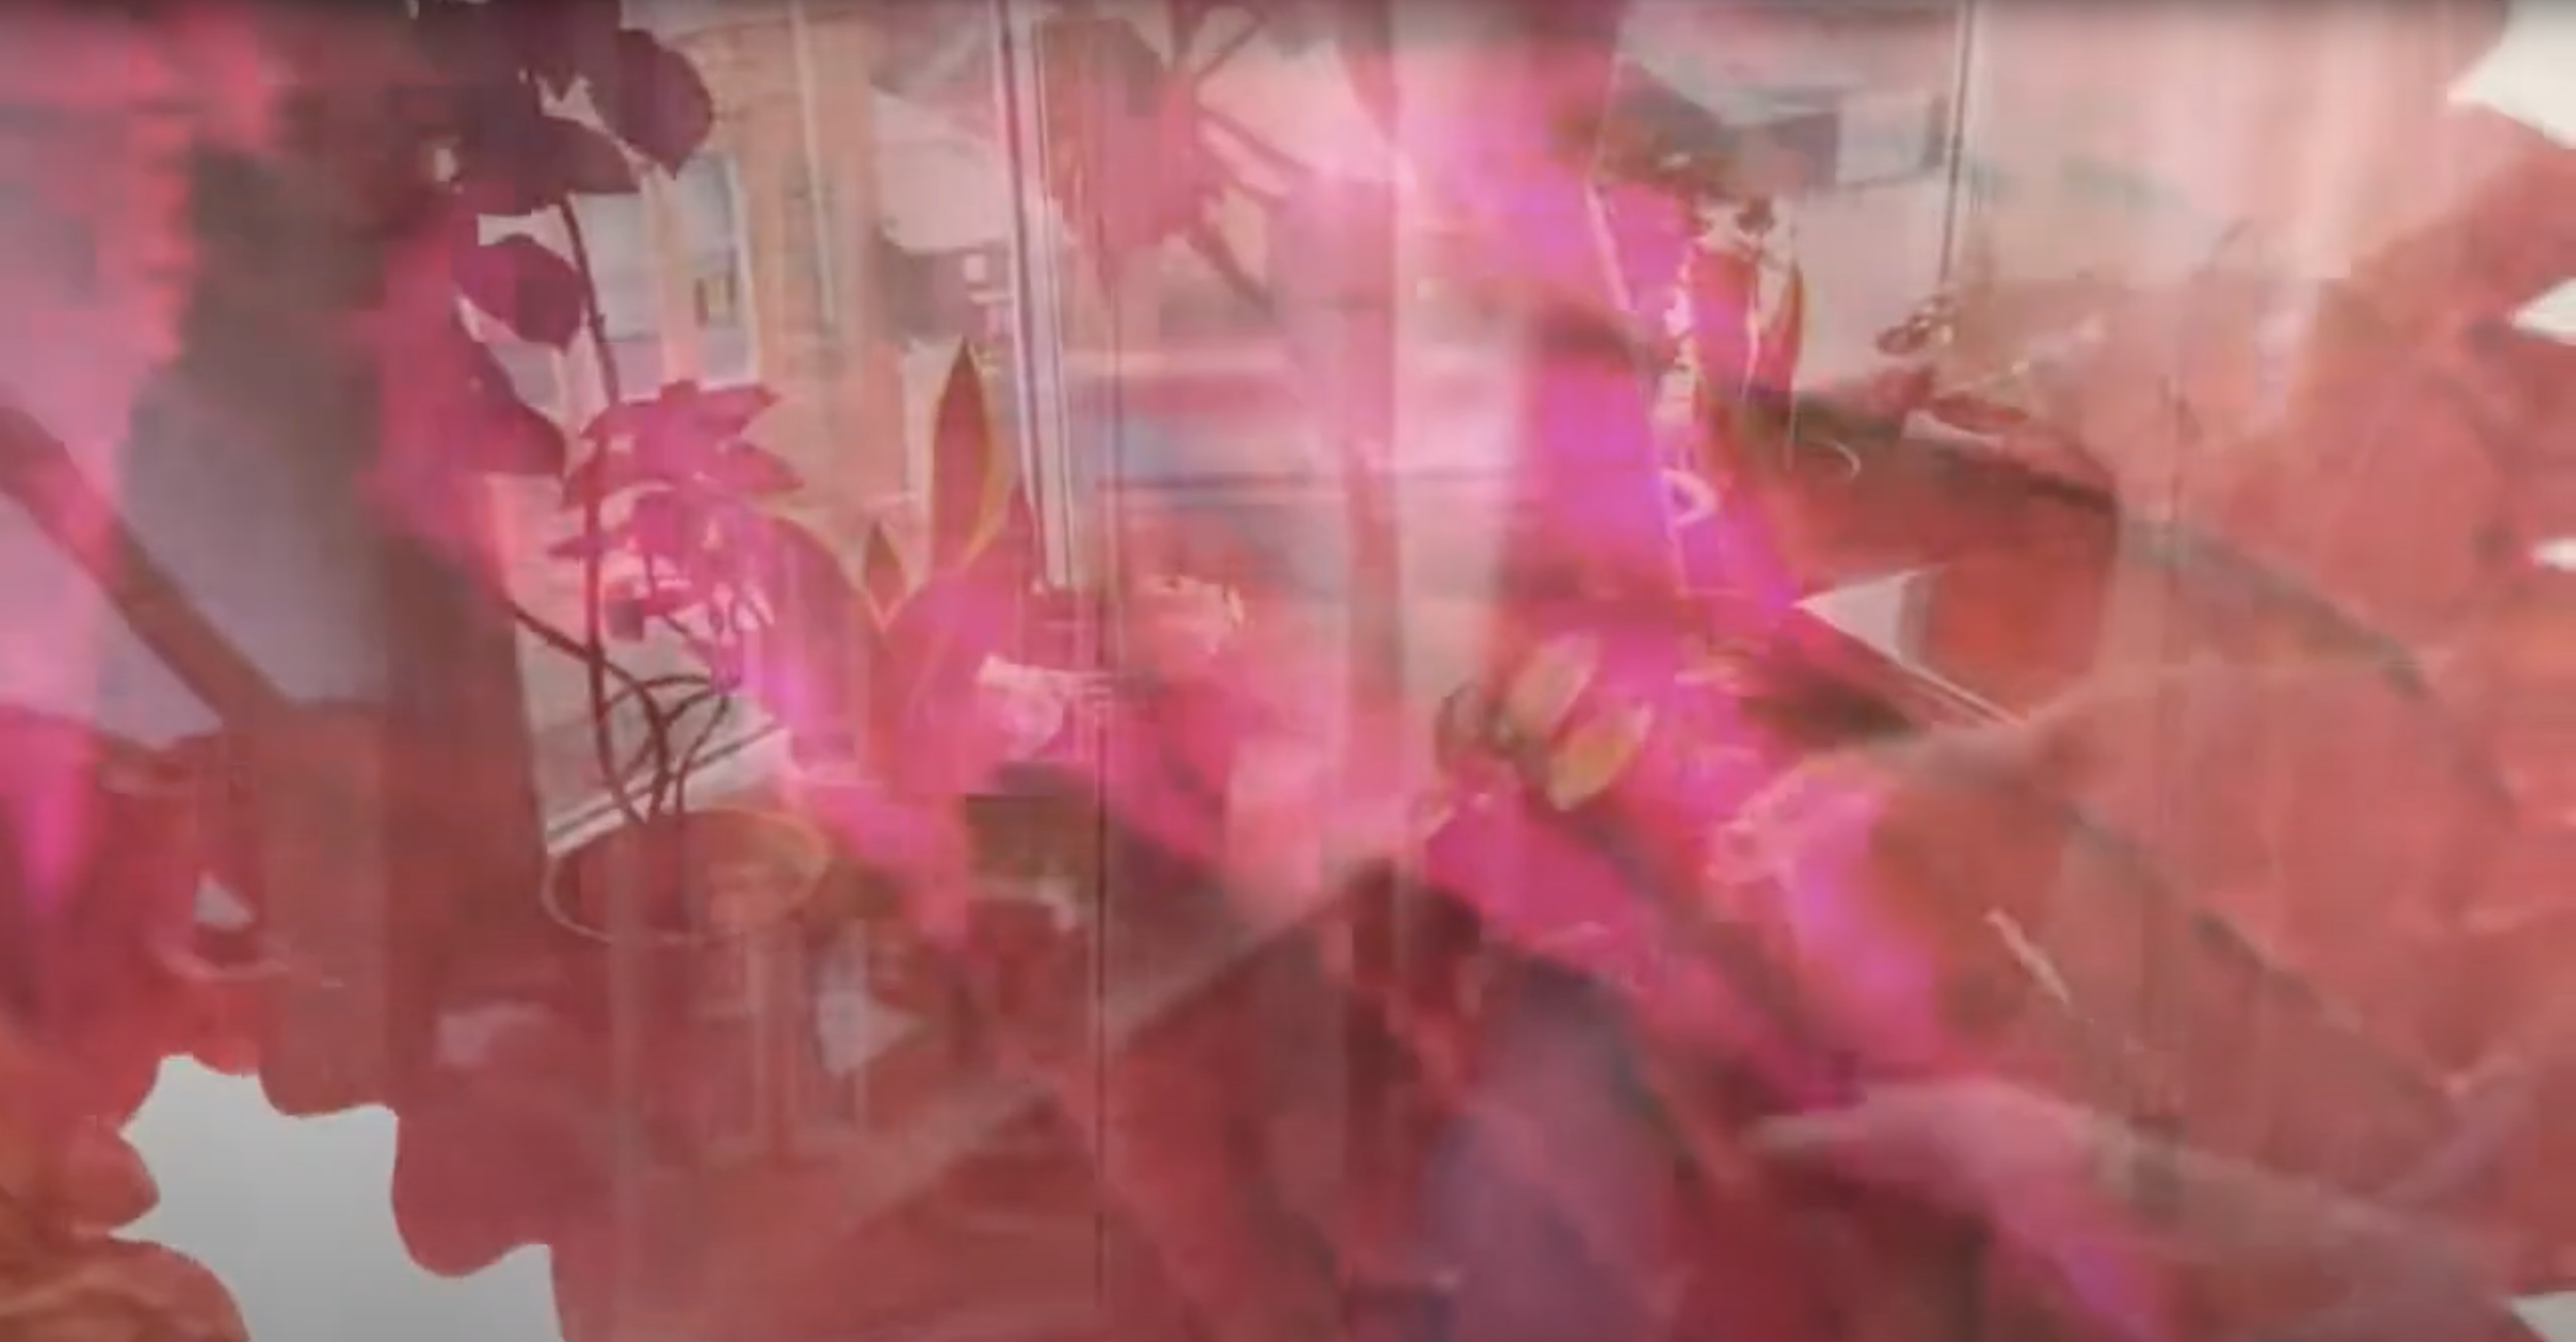 An artistic still from a music video with red and pink plants.